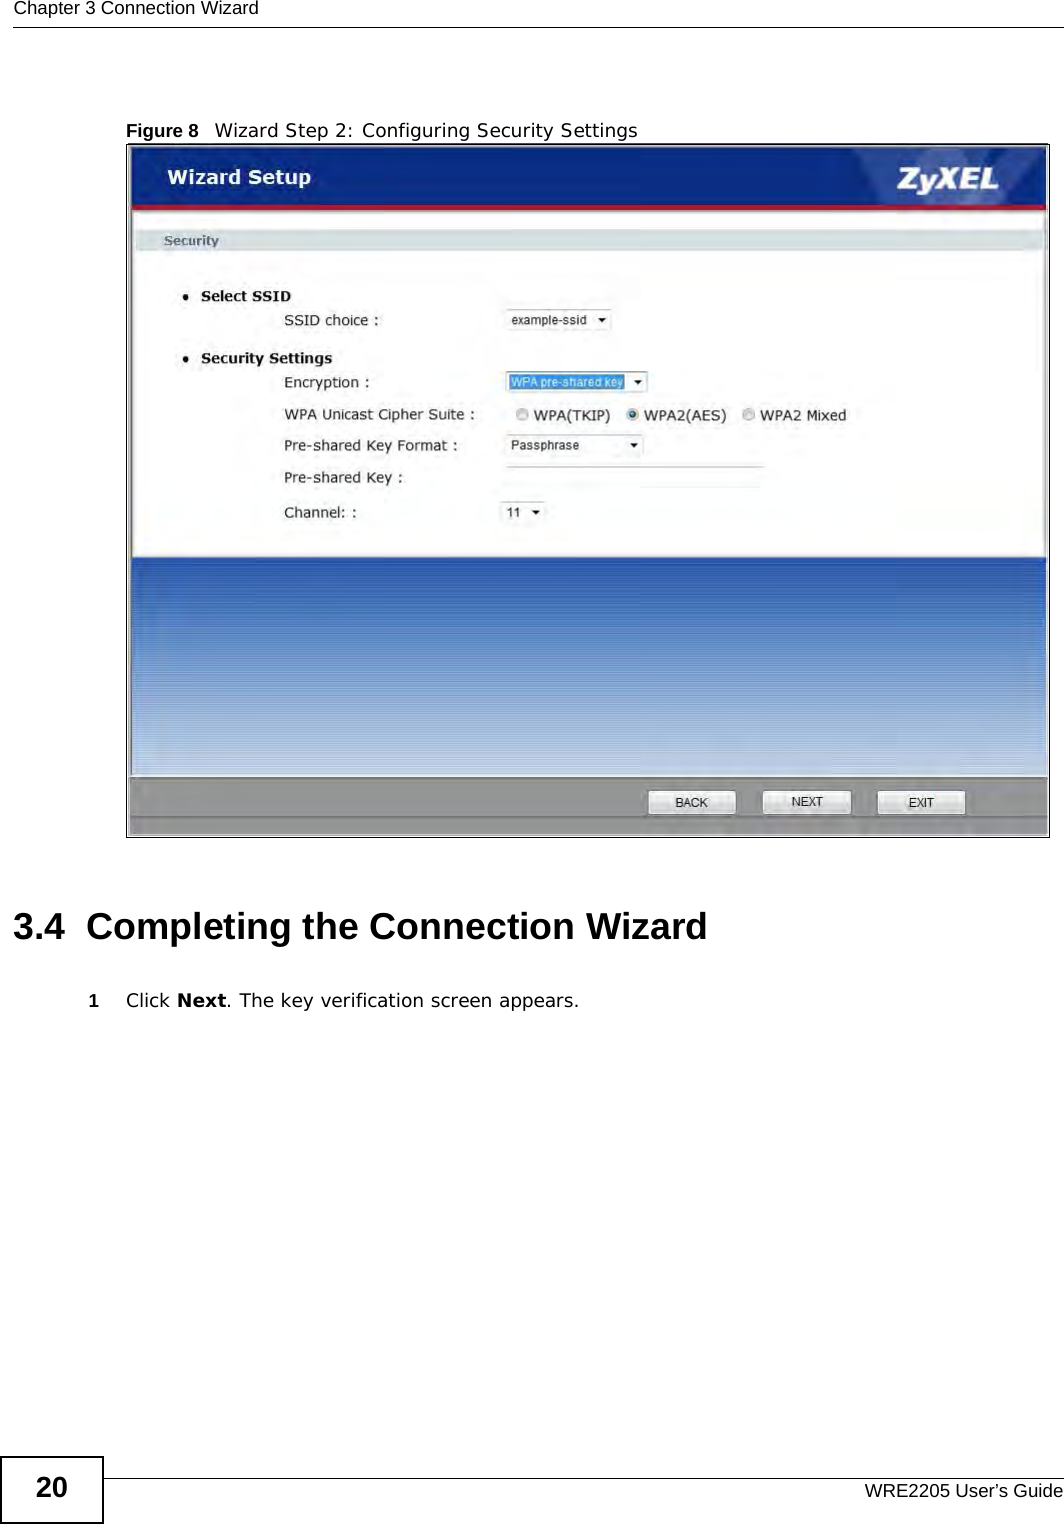 Chapter 3 Connection WizardWRE2205 User’s Guide20Figure 8   Wizard Step 2: Configuring Security Settings3.4  Completing the Connection Wizard1Click Next. The key verification screen appears.